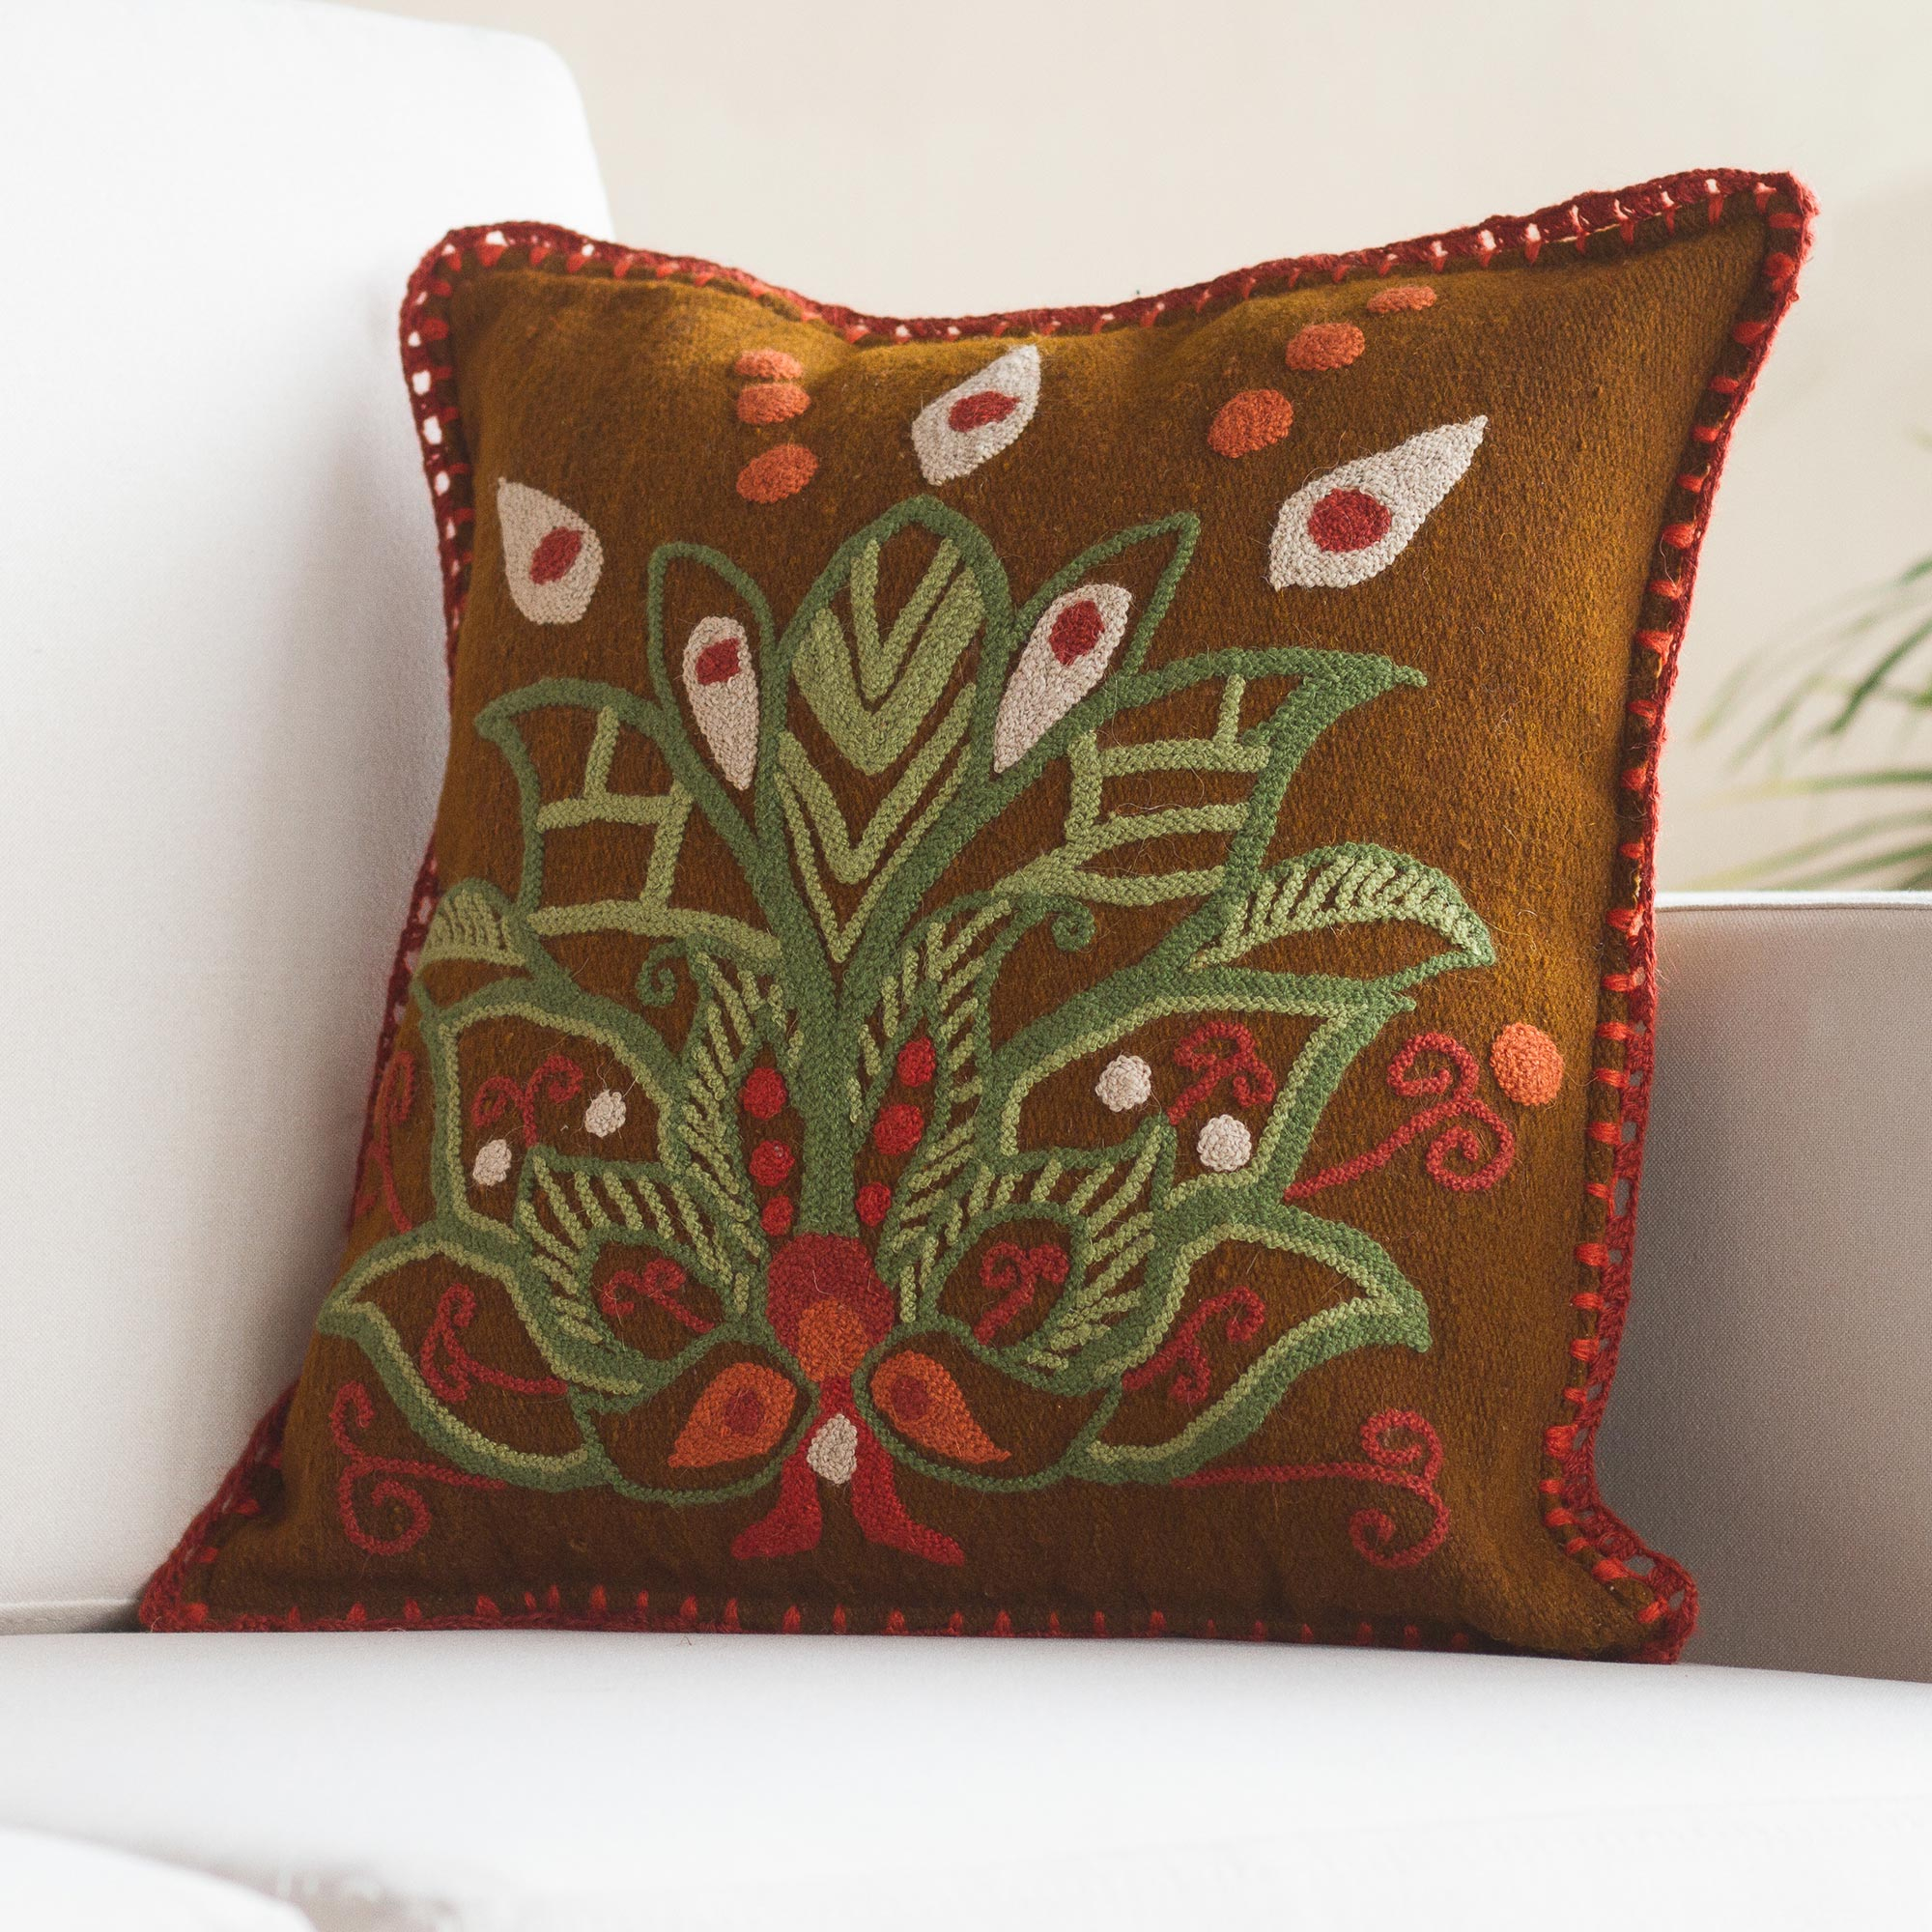 Cushions Covers Embroidered Wool Flowers Patterns Peruvian